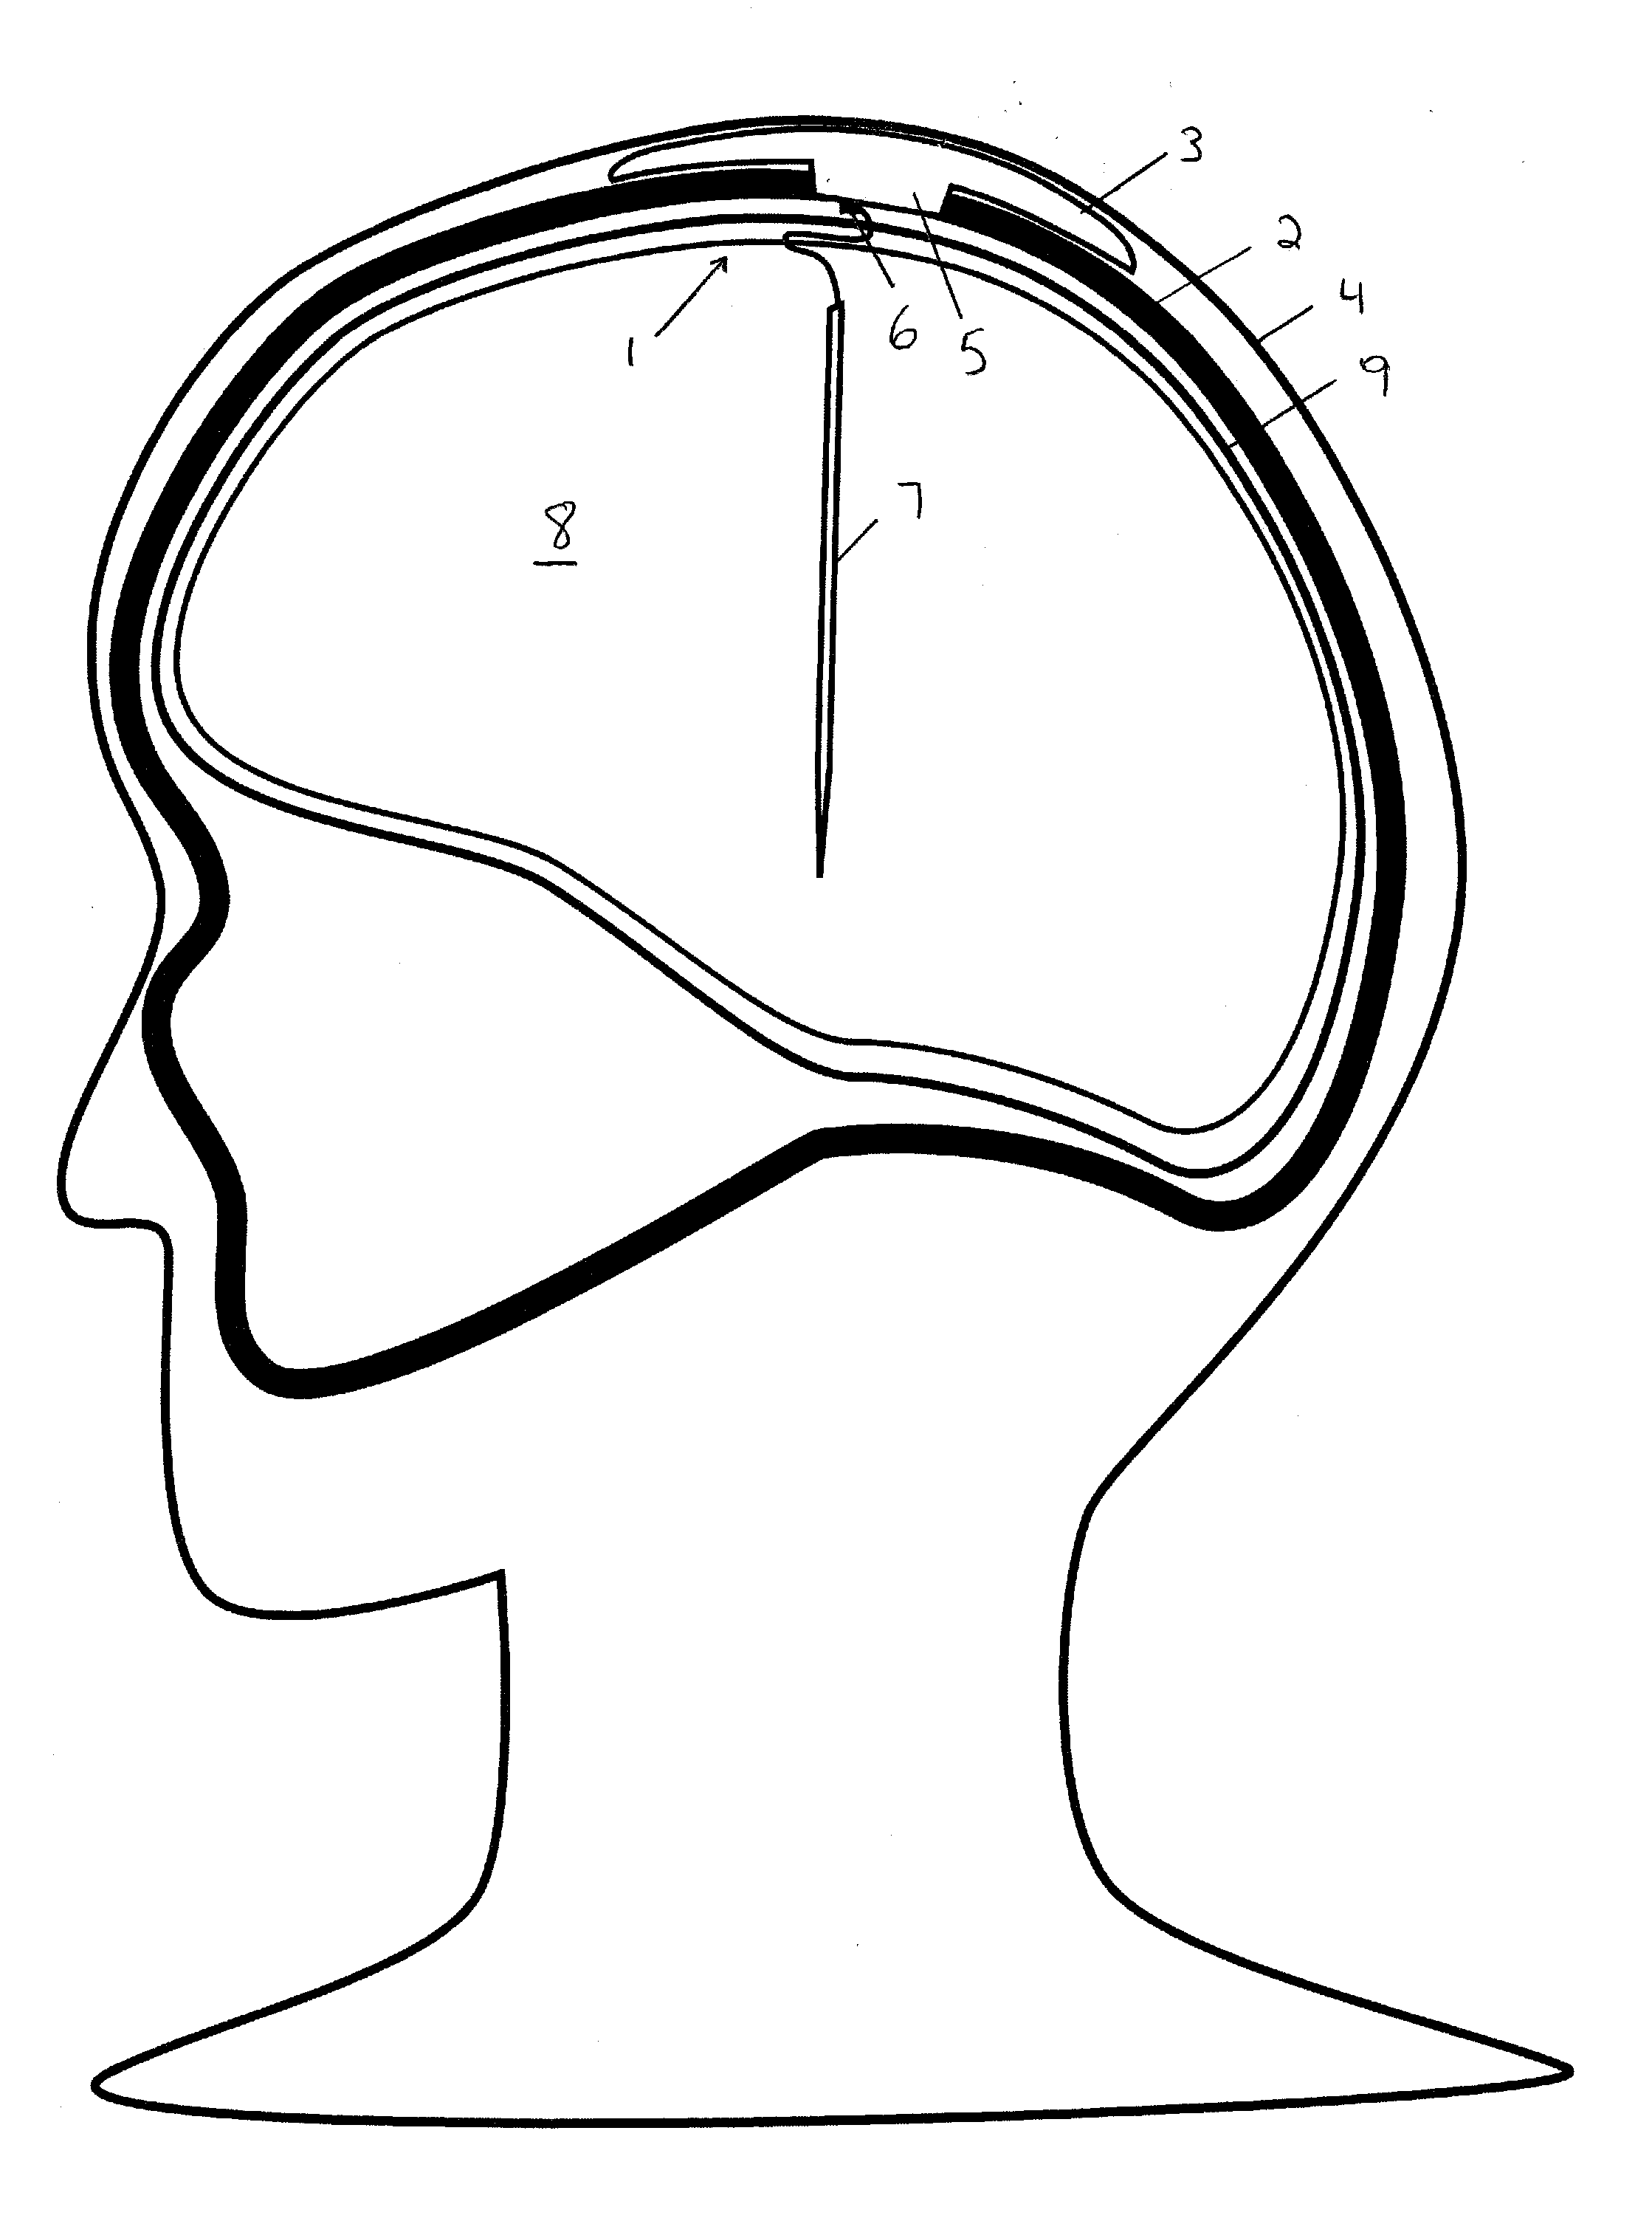 Implantable transcranial pulse generator having a collapsible portion